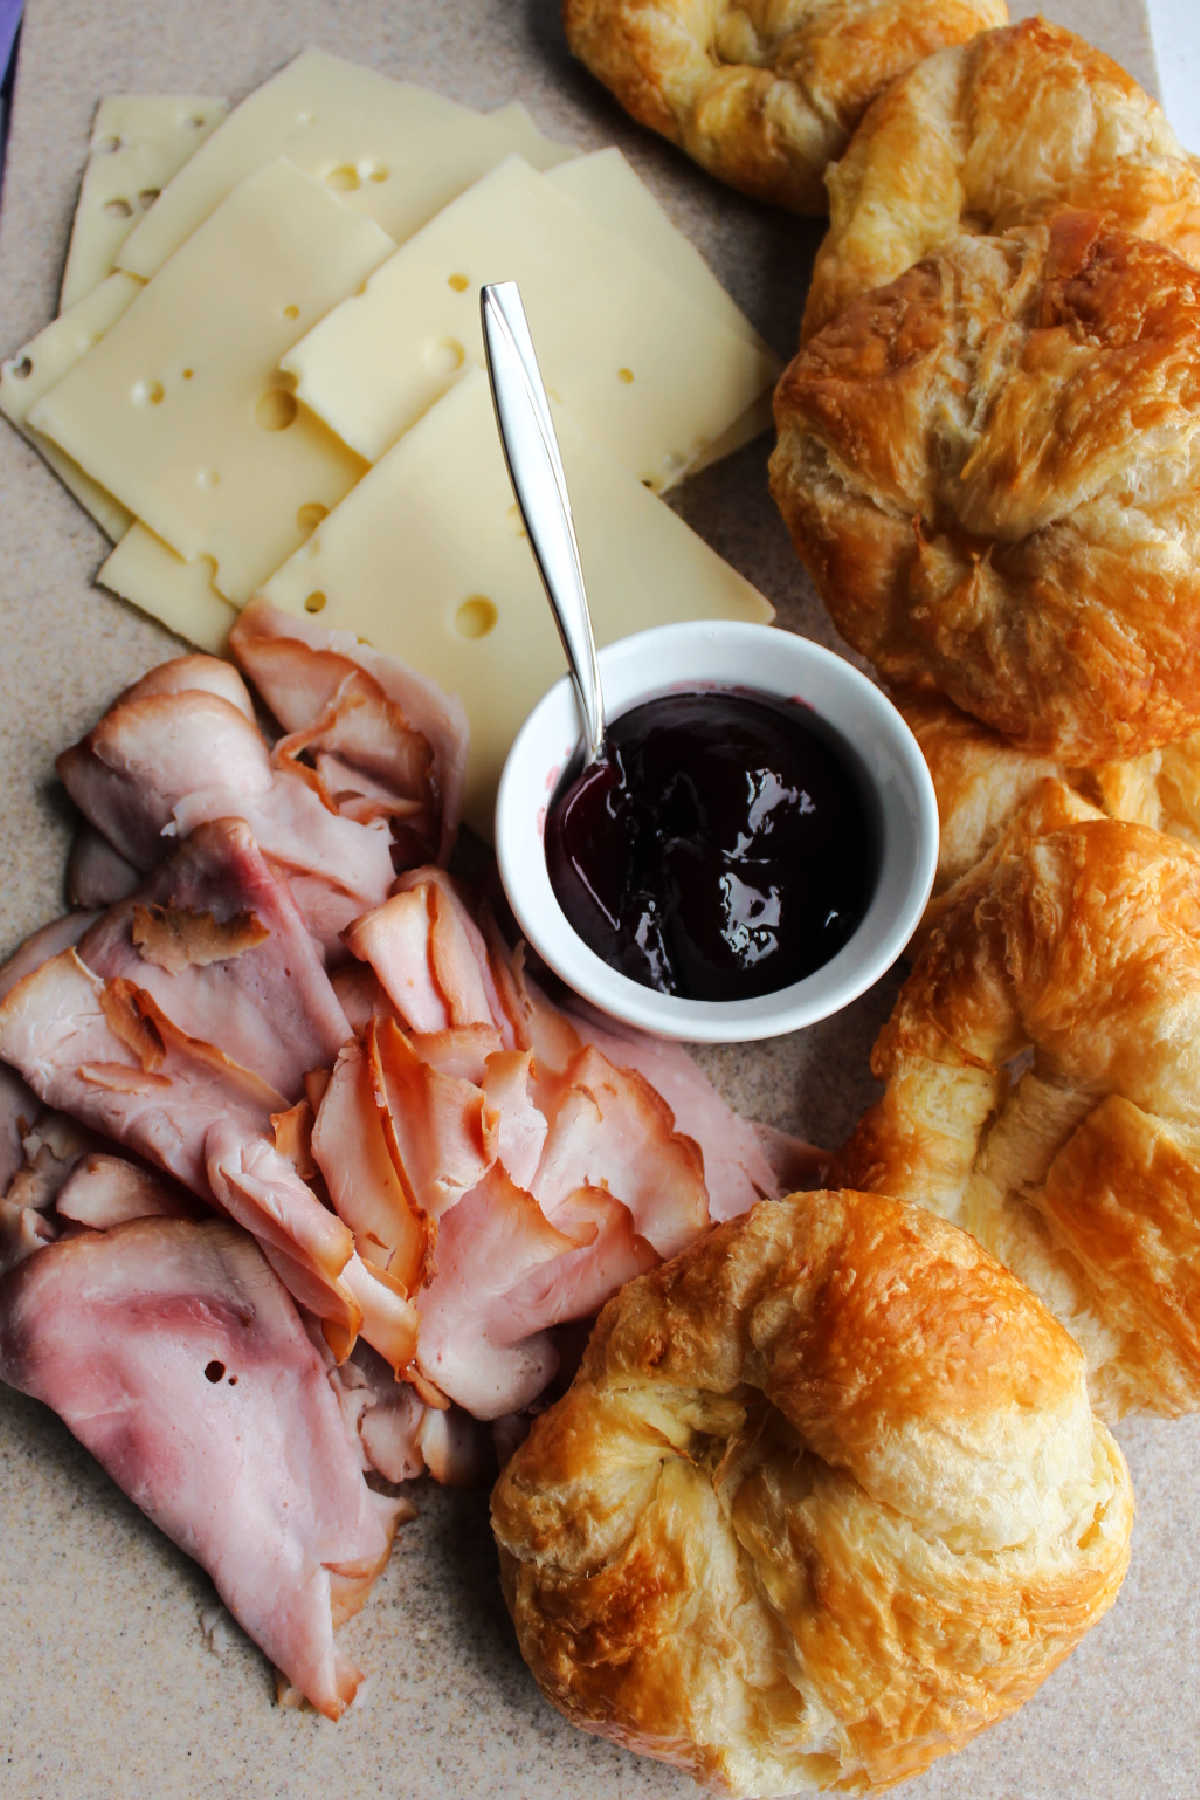 Tray of croissants, ham, swiss cheese and raspberry preserves.